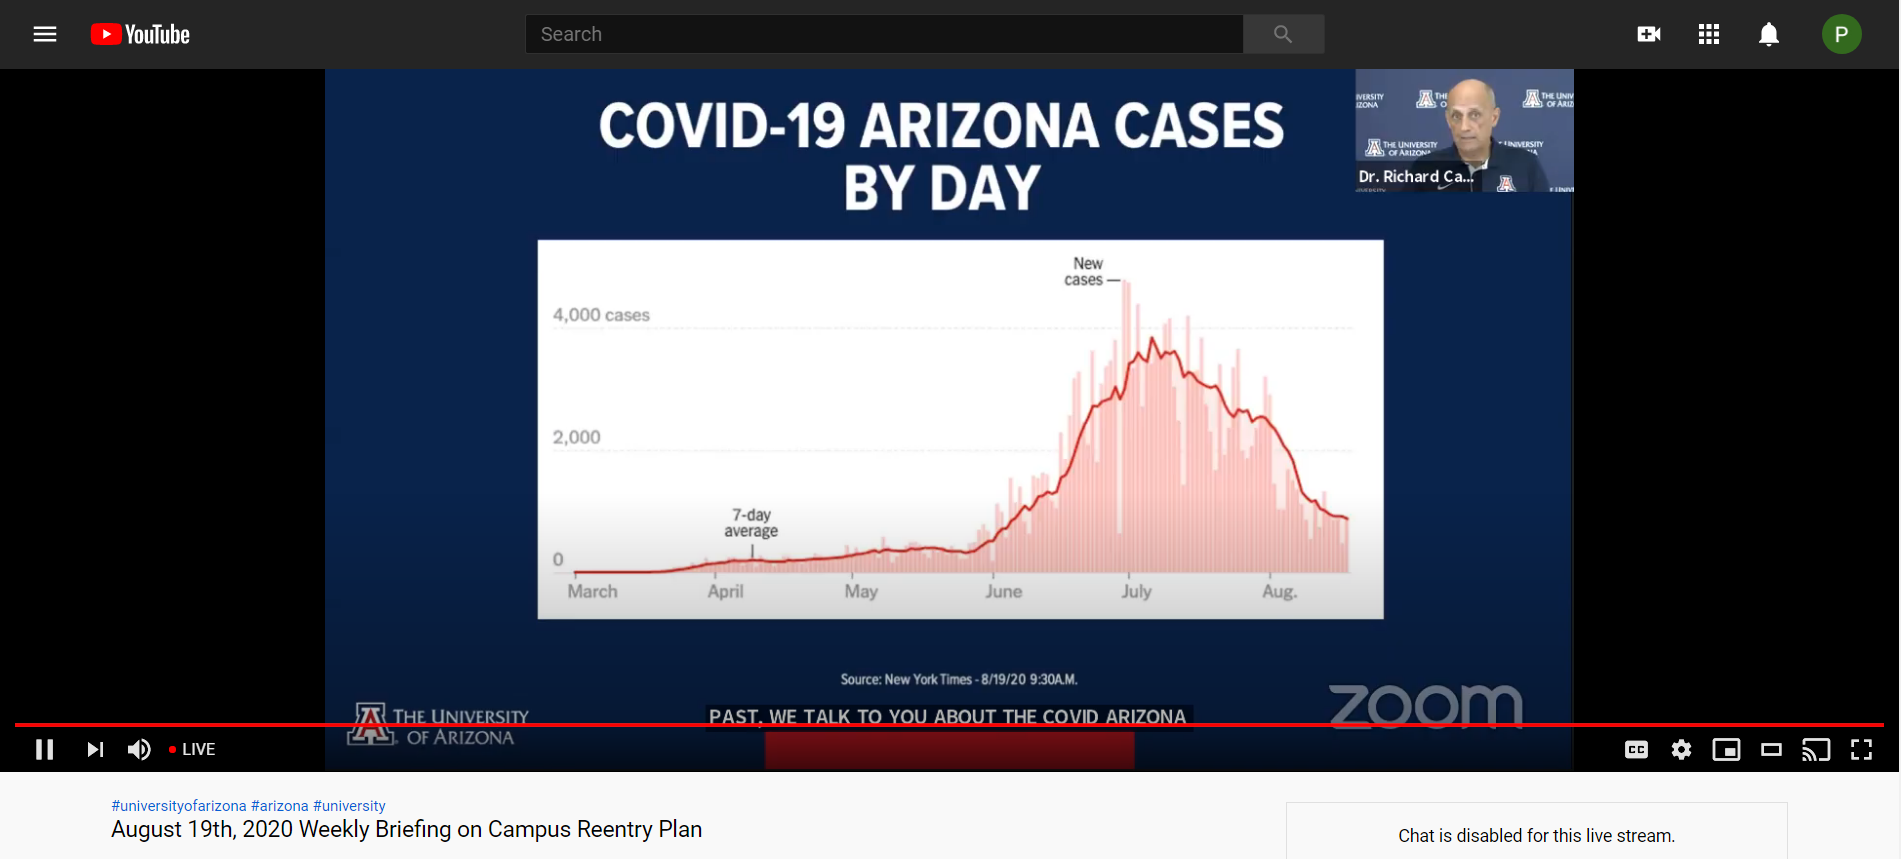 Task Force Director Dr. Richard Carmona discussed the recent downward trend of COVID-19 cases both in Pima County and statewide during the Aug. 19 campus reentry press conference.